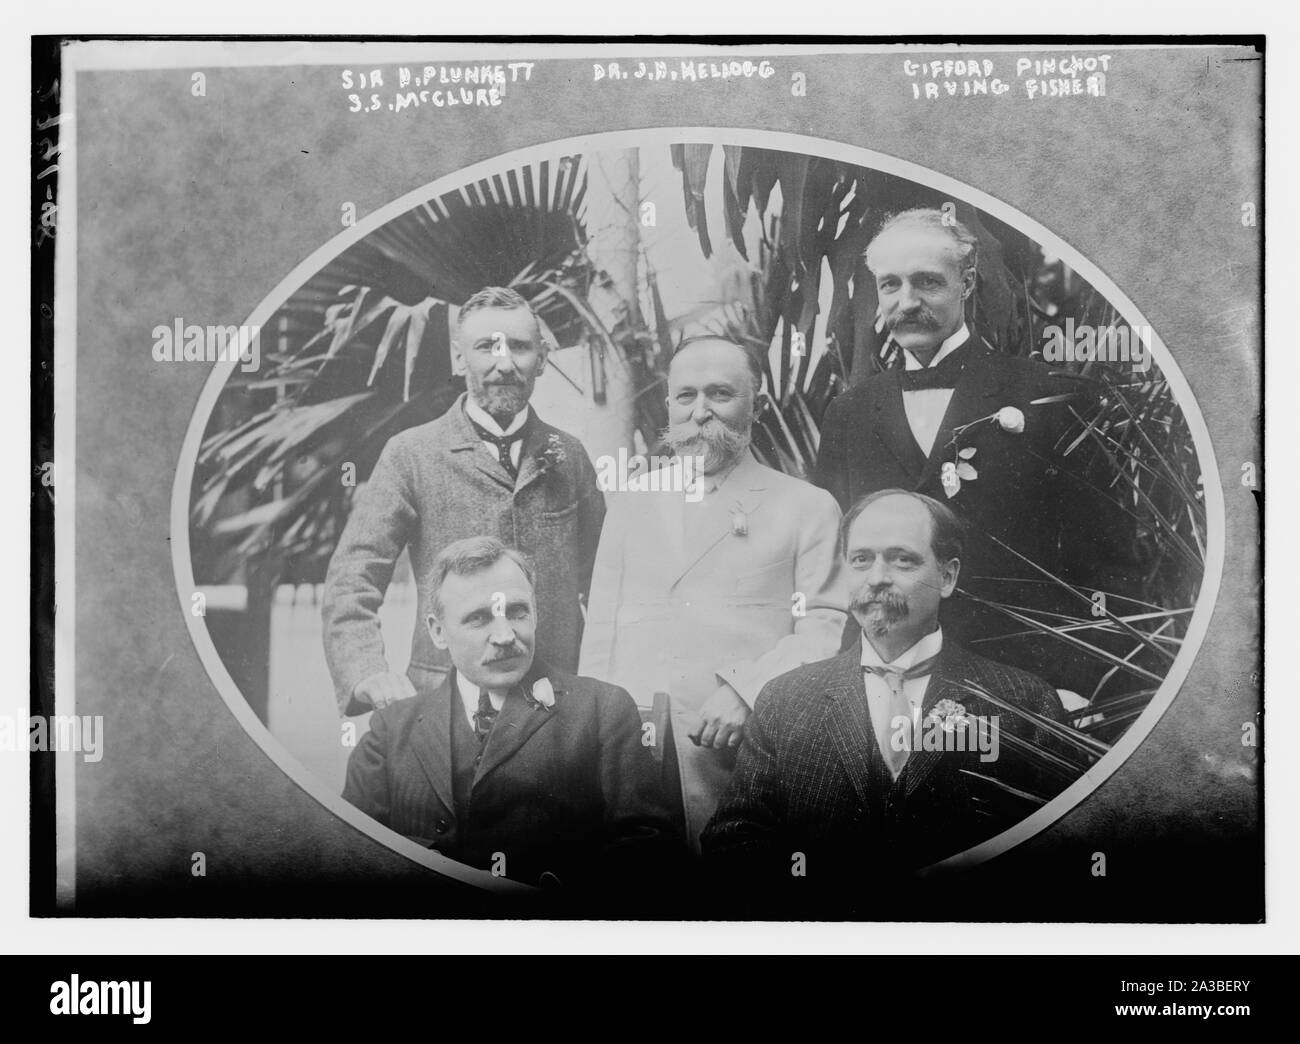 Sir H. Plunkett, Dr. J.H. Kellog, G. Pinchot, S.S. McClure, and Irving Fisher Stock Photo